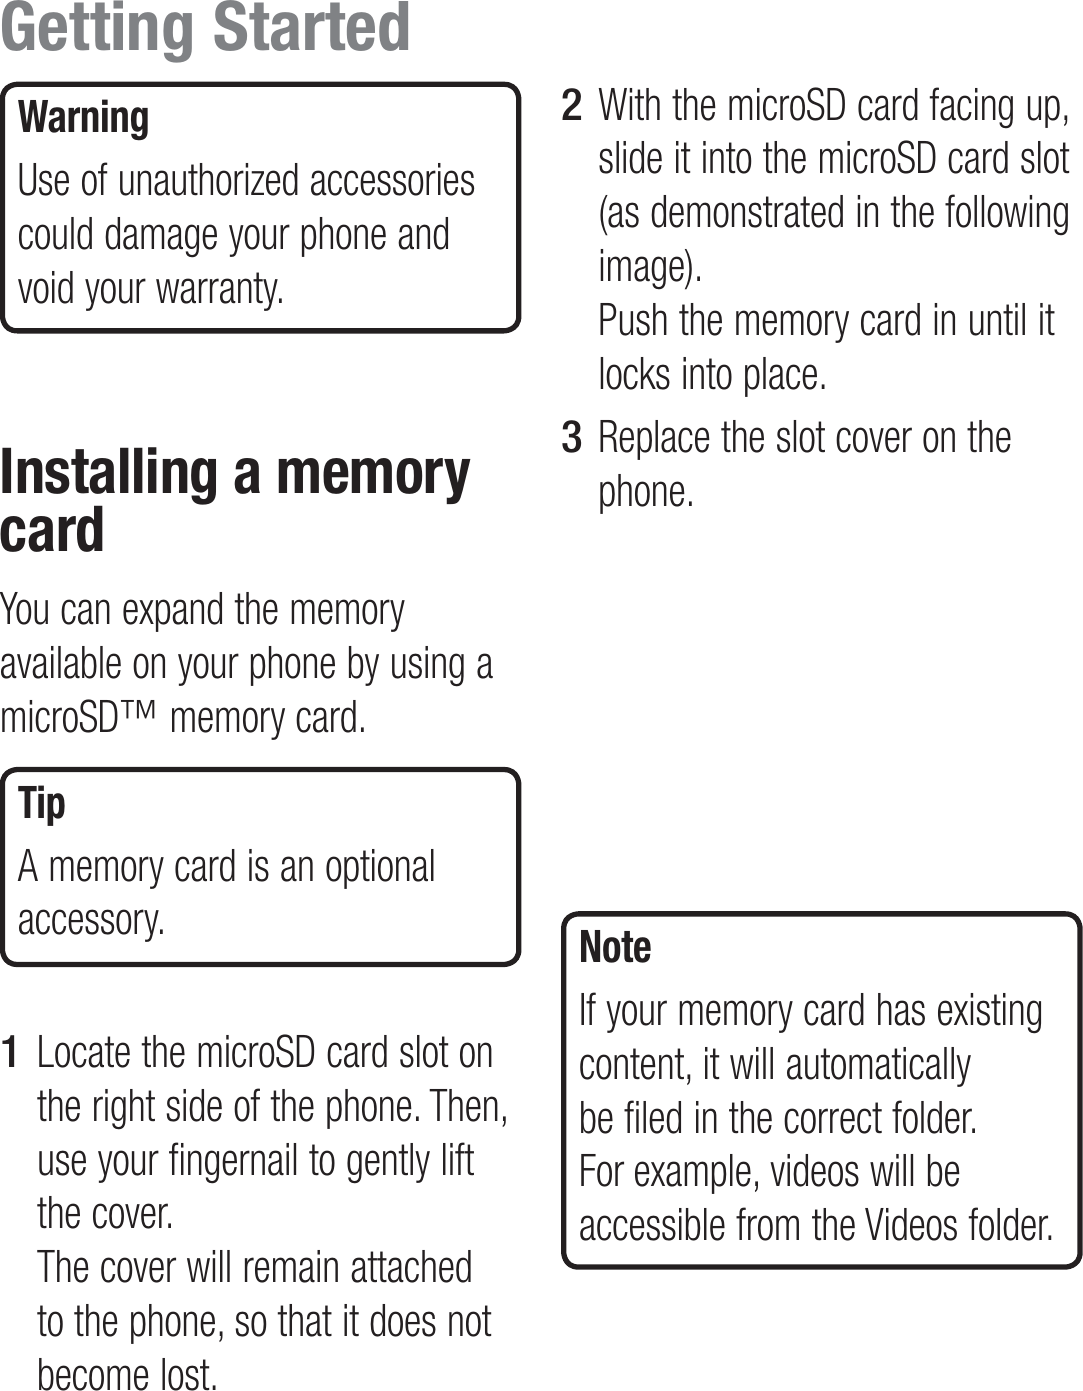 WarningUse of unauthorized accessories could damage your phone and void your warranty.Installing a memory cardYou can expand the memory available on your phone by using a microSD™ memory card. TipA memory card is an optional accessory.Locate the microSD card slot on the right side of the phone. Then, use your fingernail to gently lift the cover.  The cover will remain attached to the phone, so that it does not become lost. 1 With the microSD card facing up, slide it into the microSD card slot (as demonstrated in the following image).  Push the memory card in until it locks into place.Replace the slot cover on the phone.NoteIf your memory card has existing content, it will automatically be filed in the correct folder. For example, videos will be accessible from the Videos folder.2 3 Getting Started